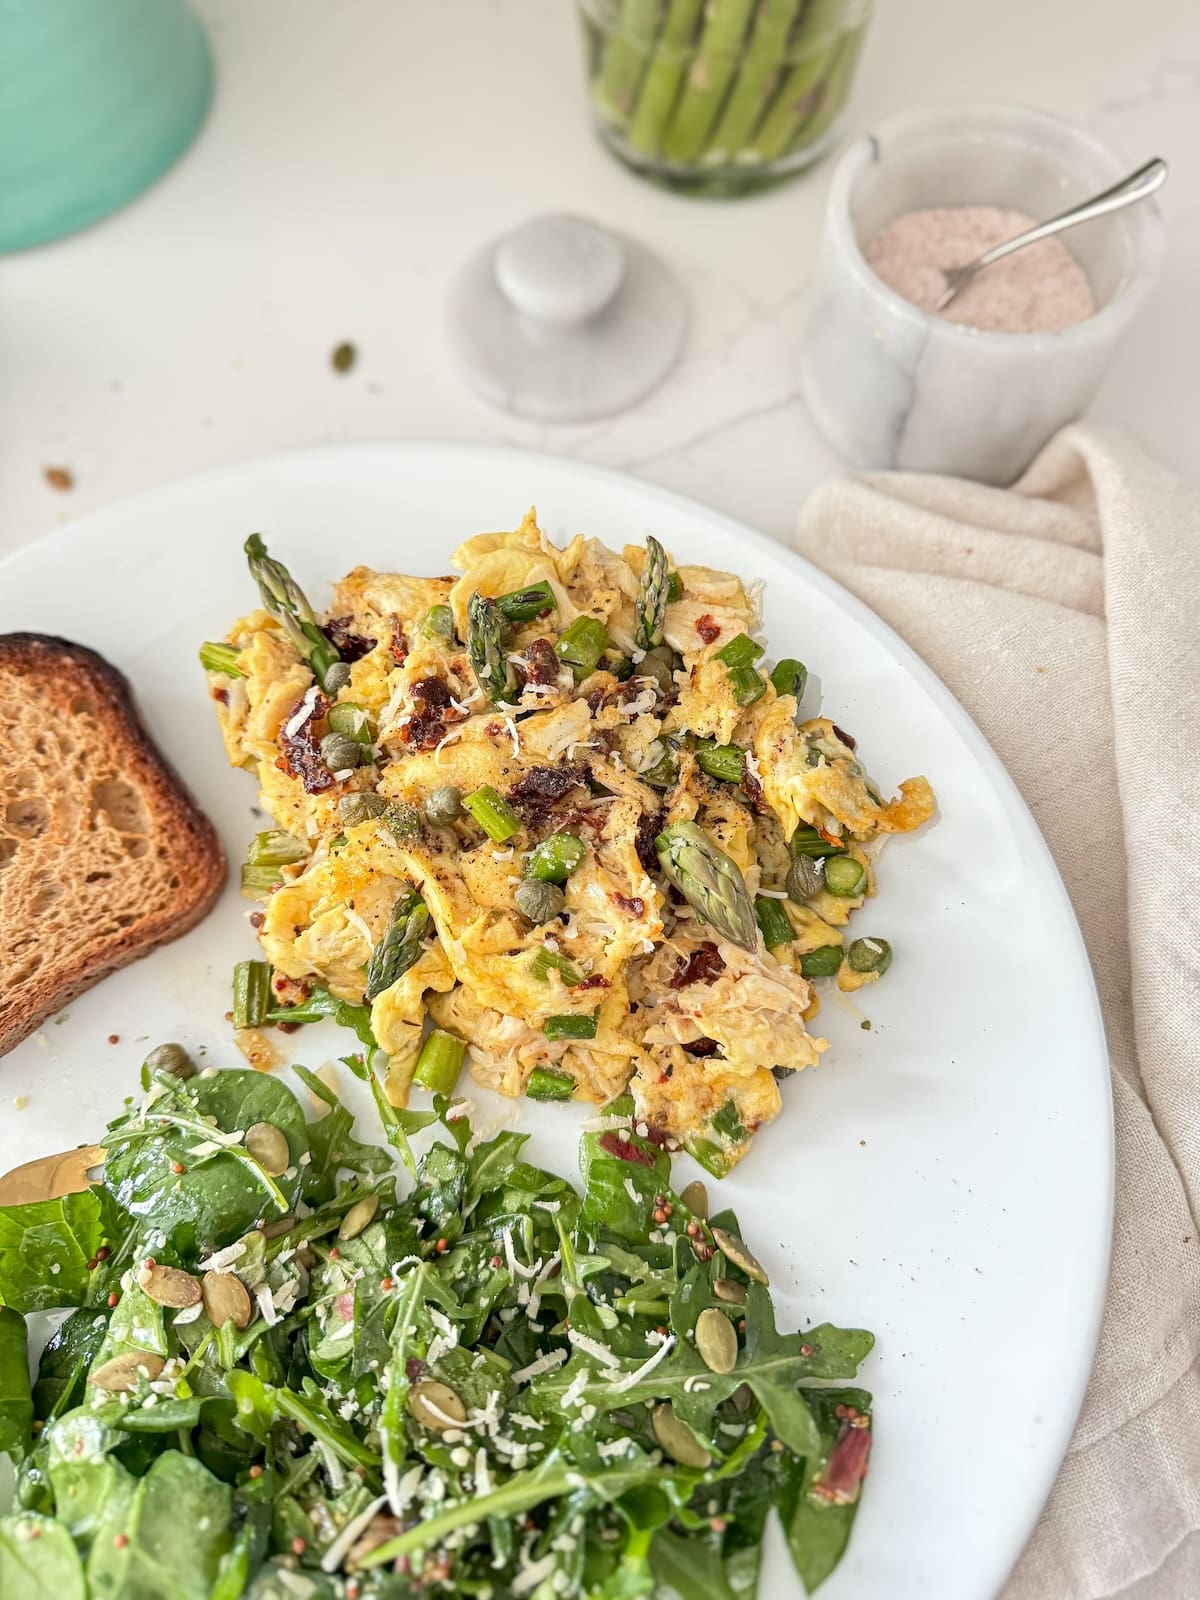 A plate of scrambled eggs with crab meat and asparagus, next to a salad.